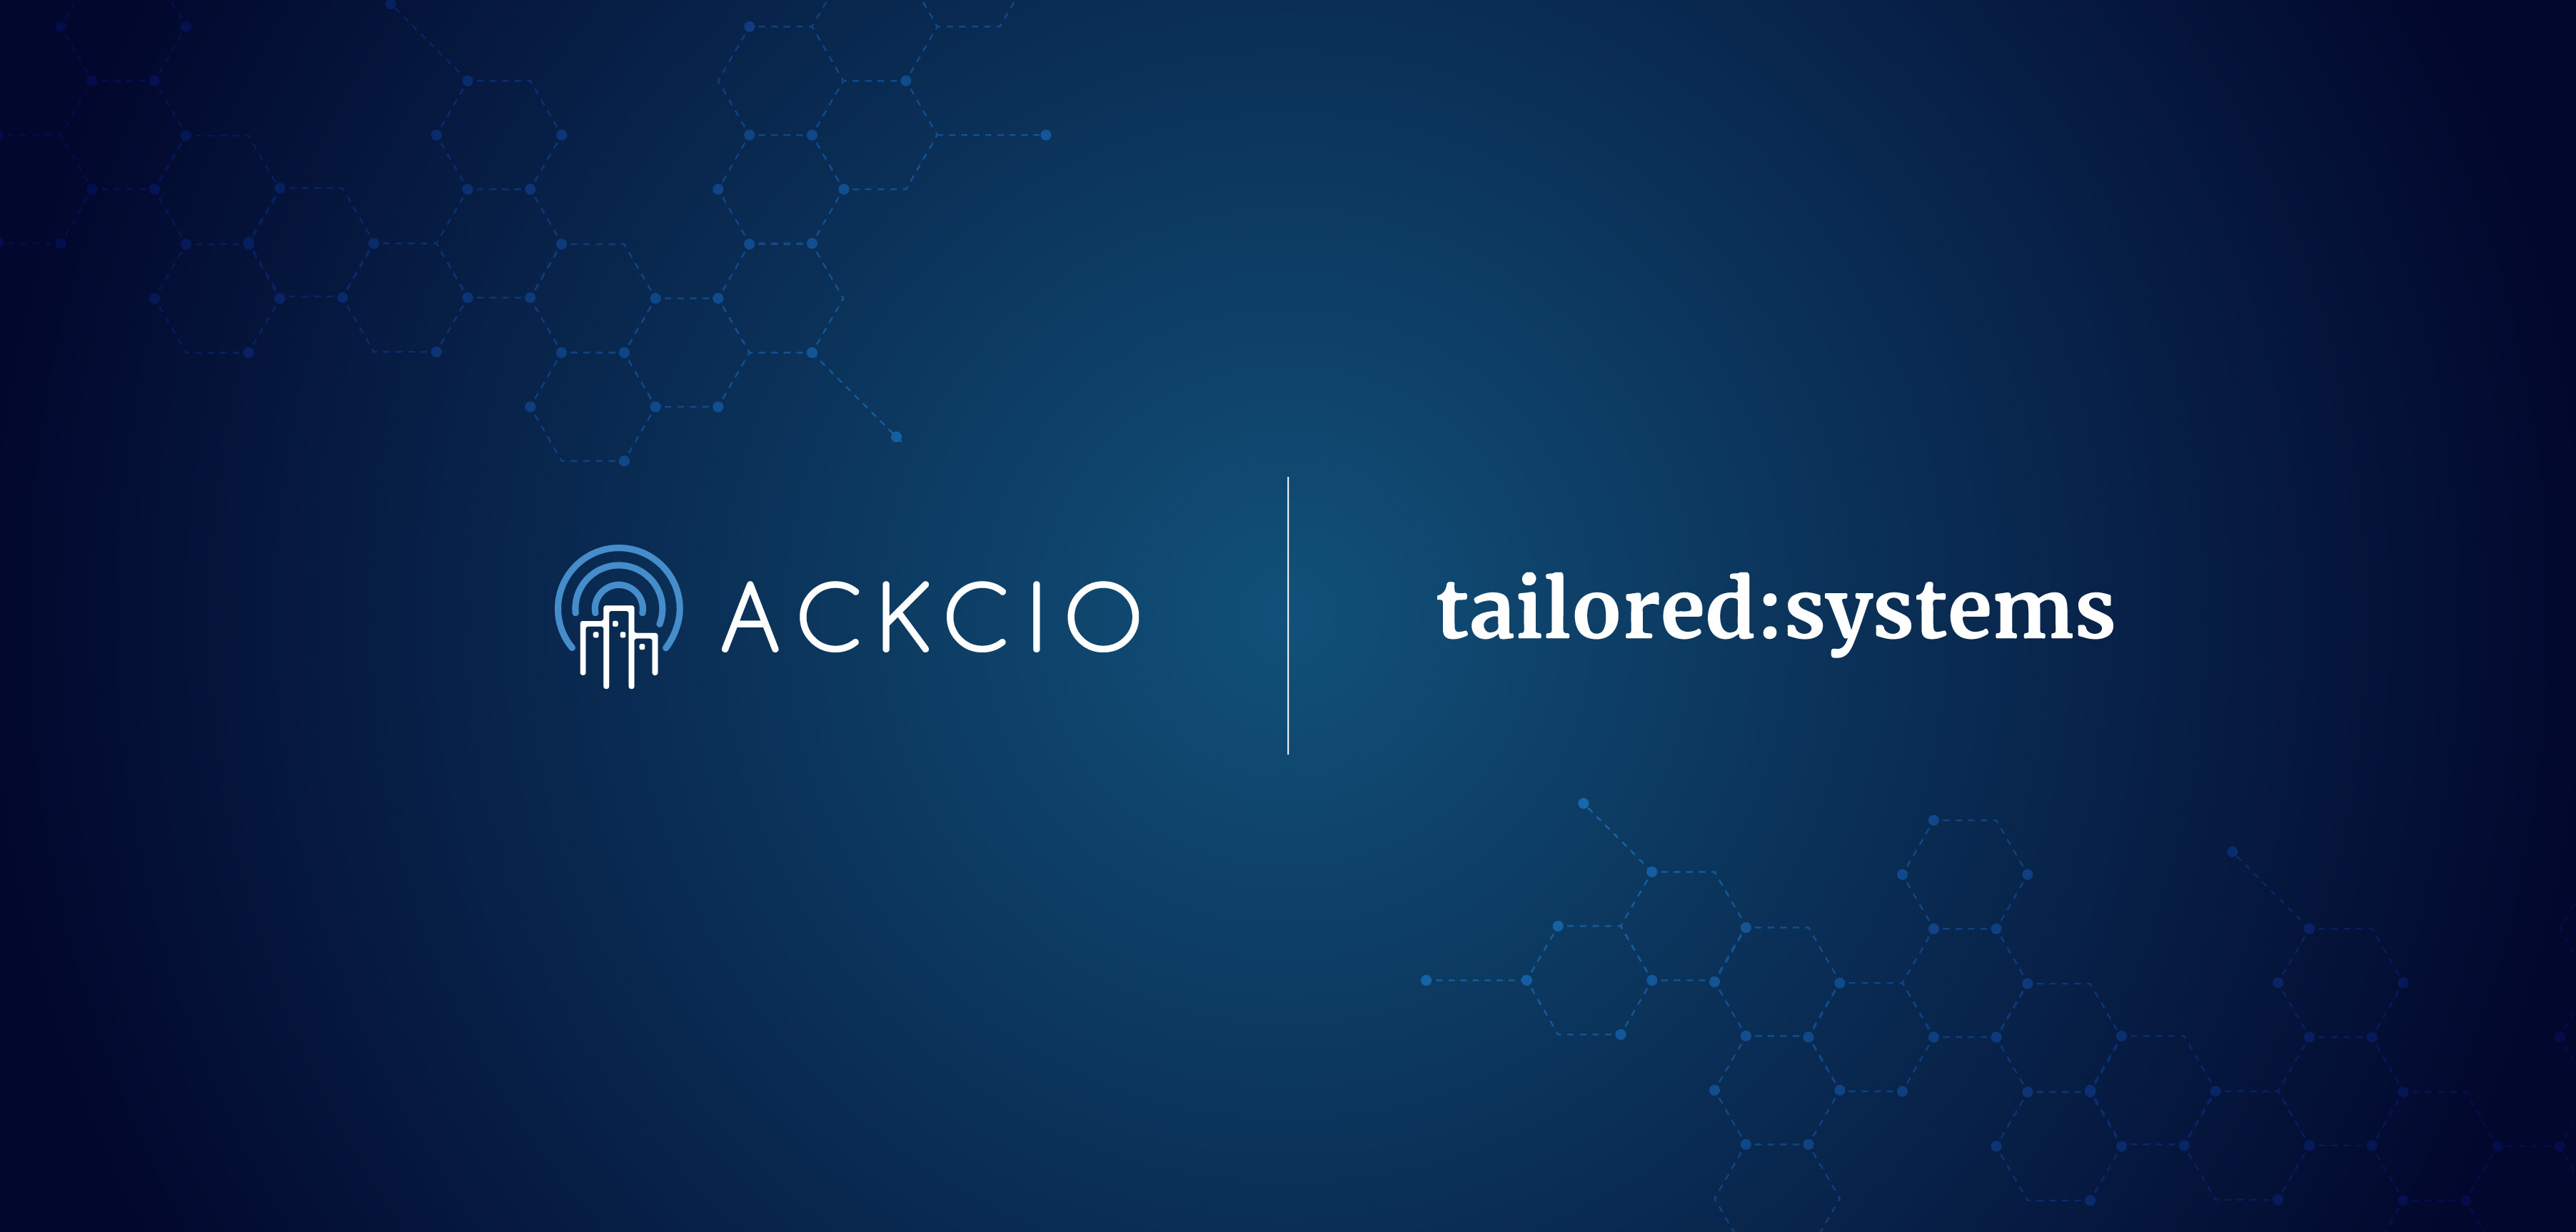 Ackcio Partners With tailored:systems for Europe Expansion